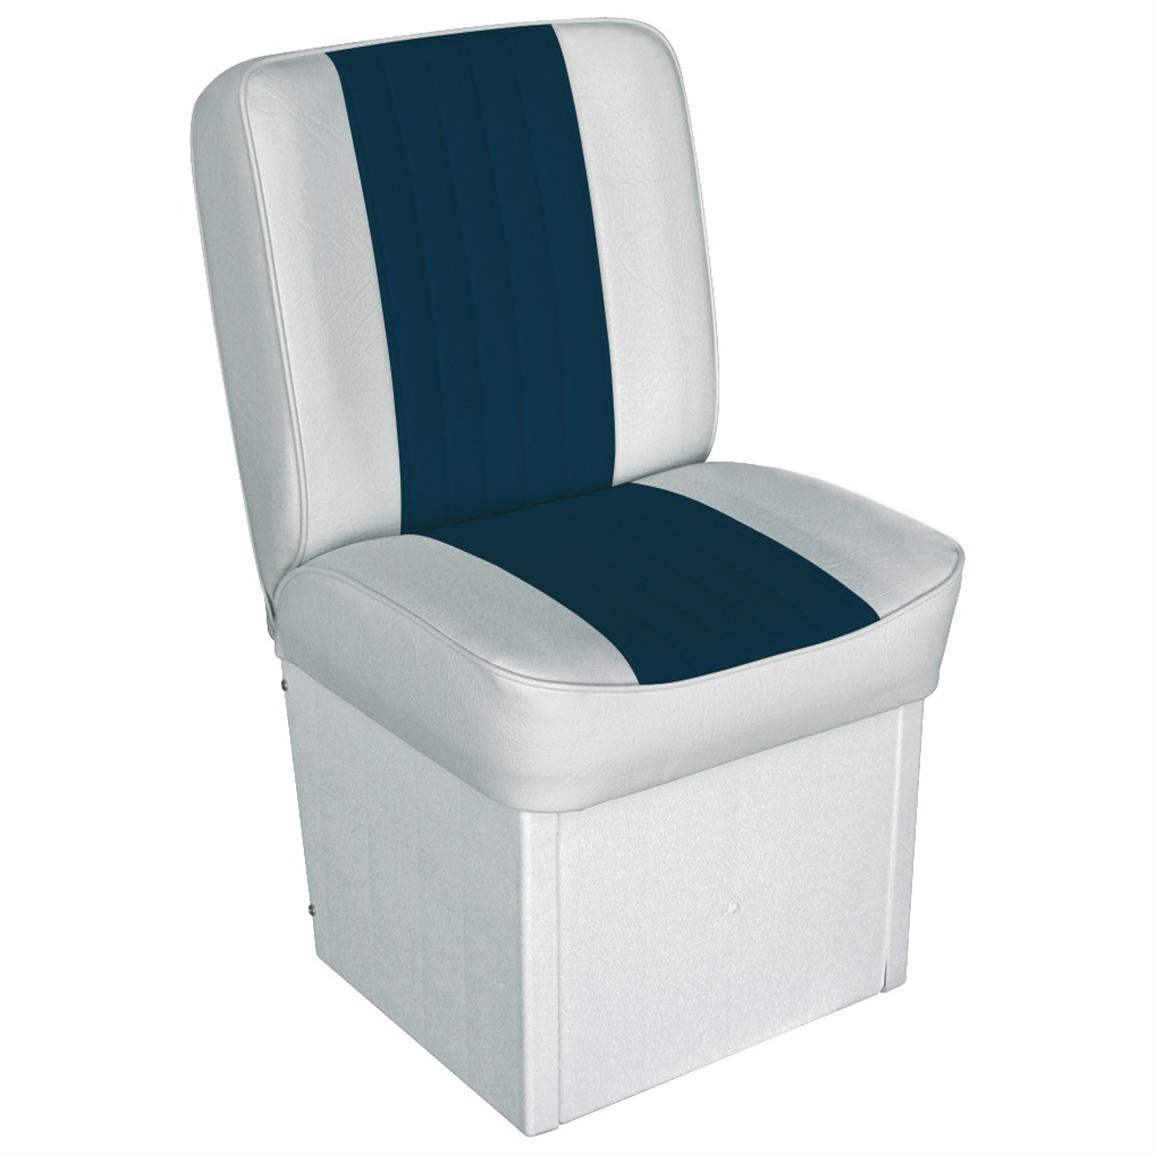 Wise Deluxe Jump Seat, White / Navy